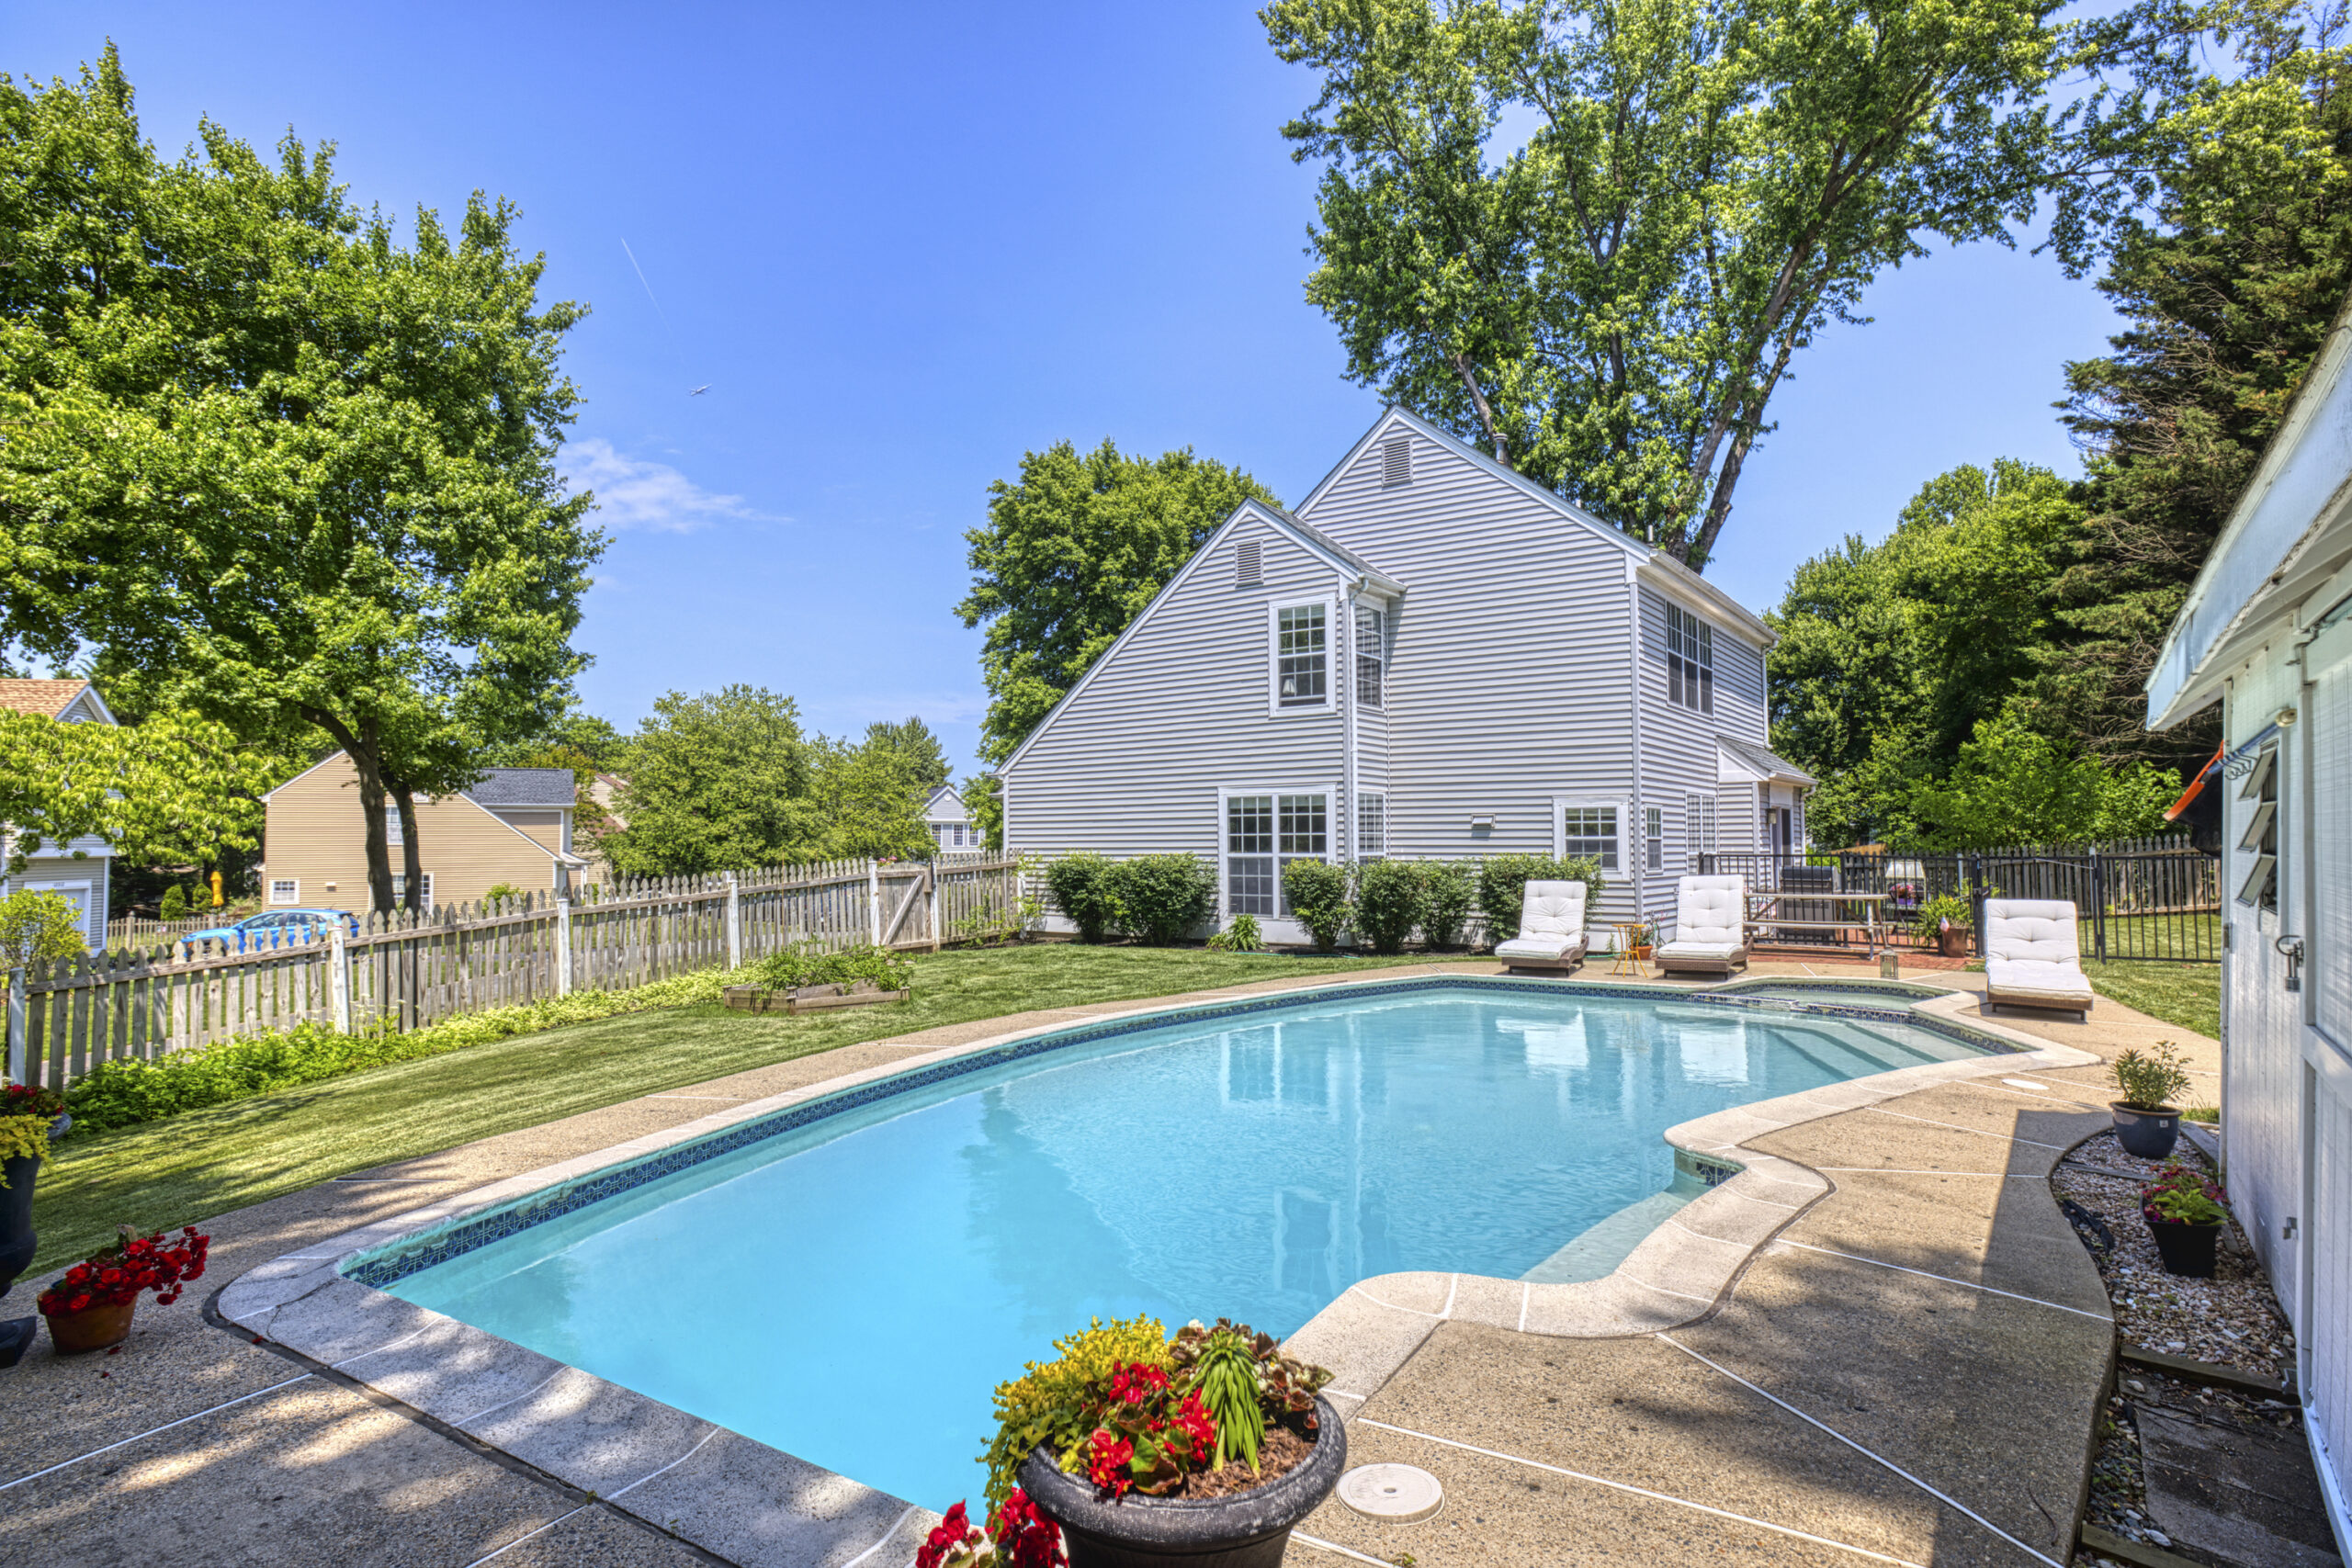 Professional exterior photo of 12309 Stalwart Court - showing the rear of the single family home with grey vinyl siding and the in-ground pool with black metal fence separating the patio area from the brick patio